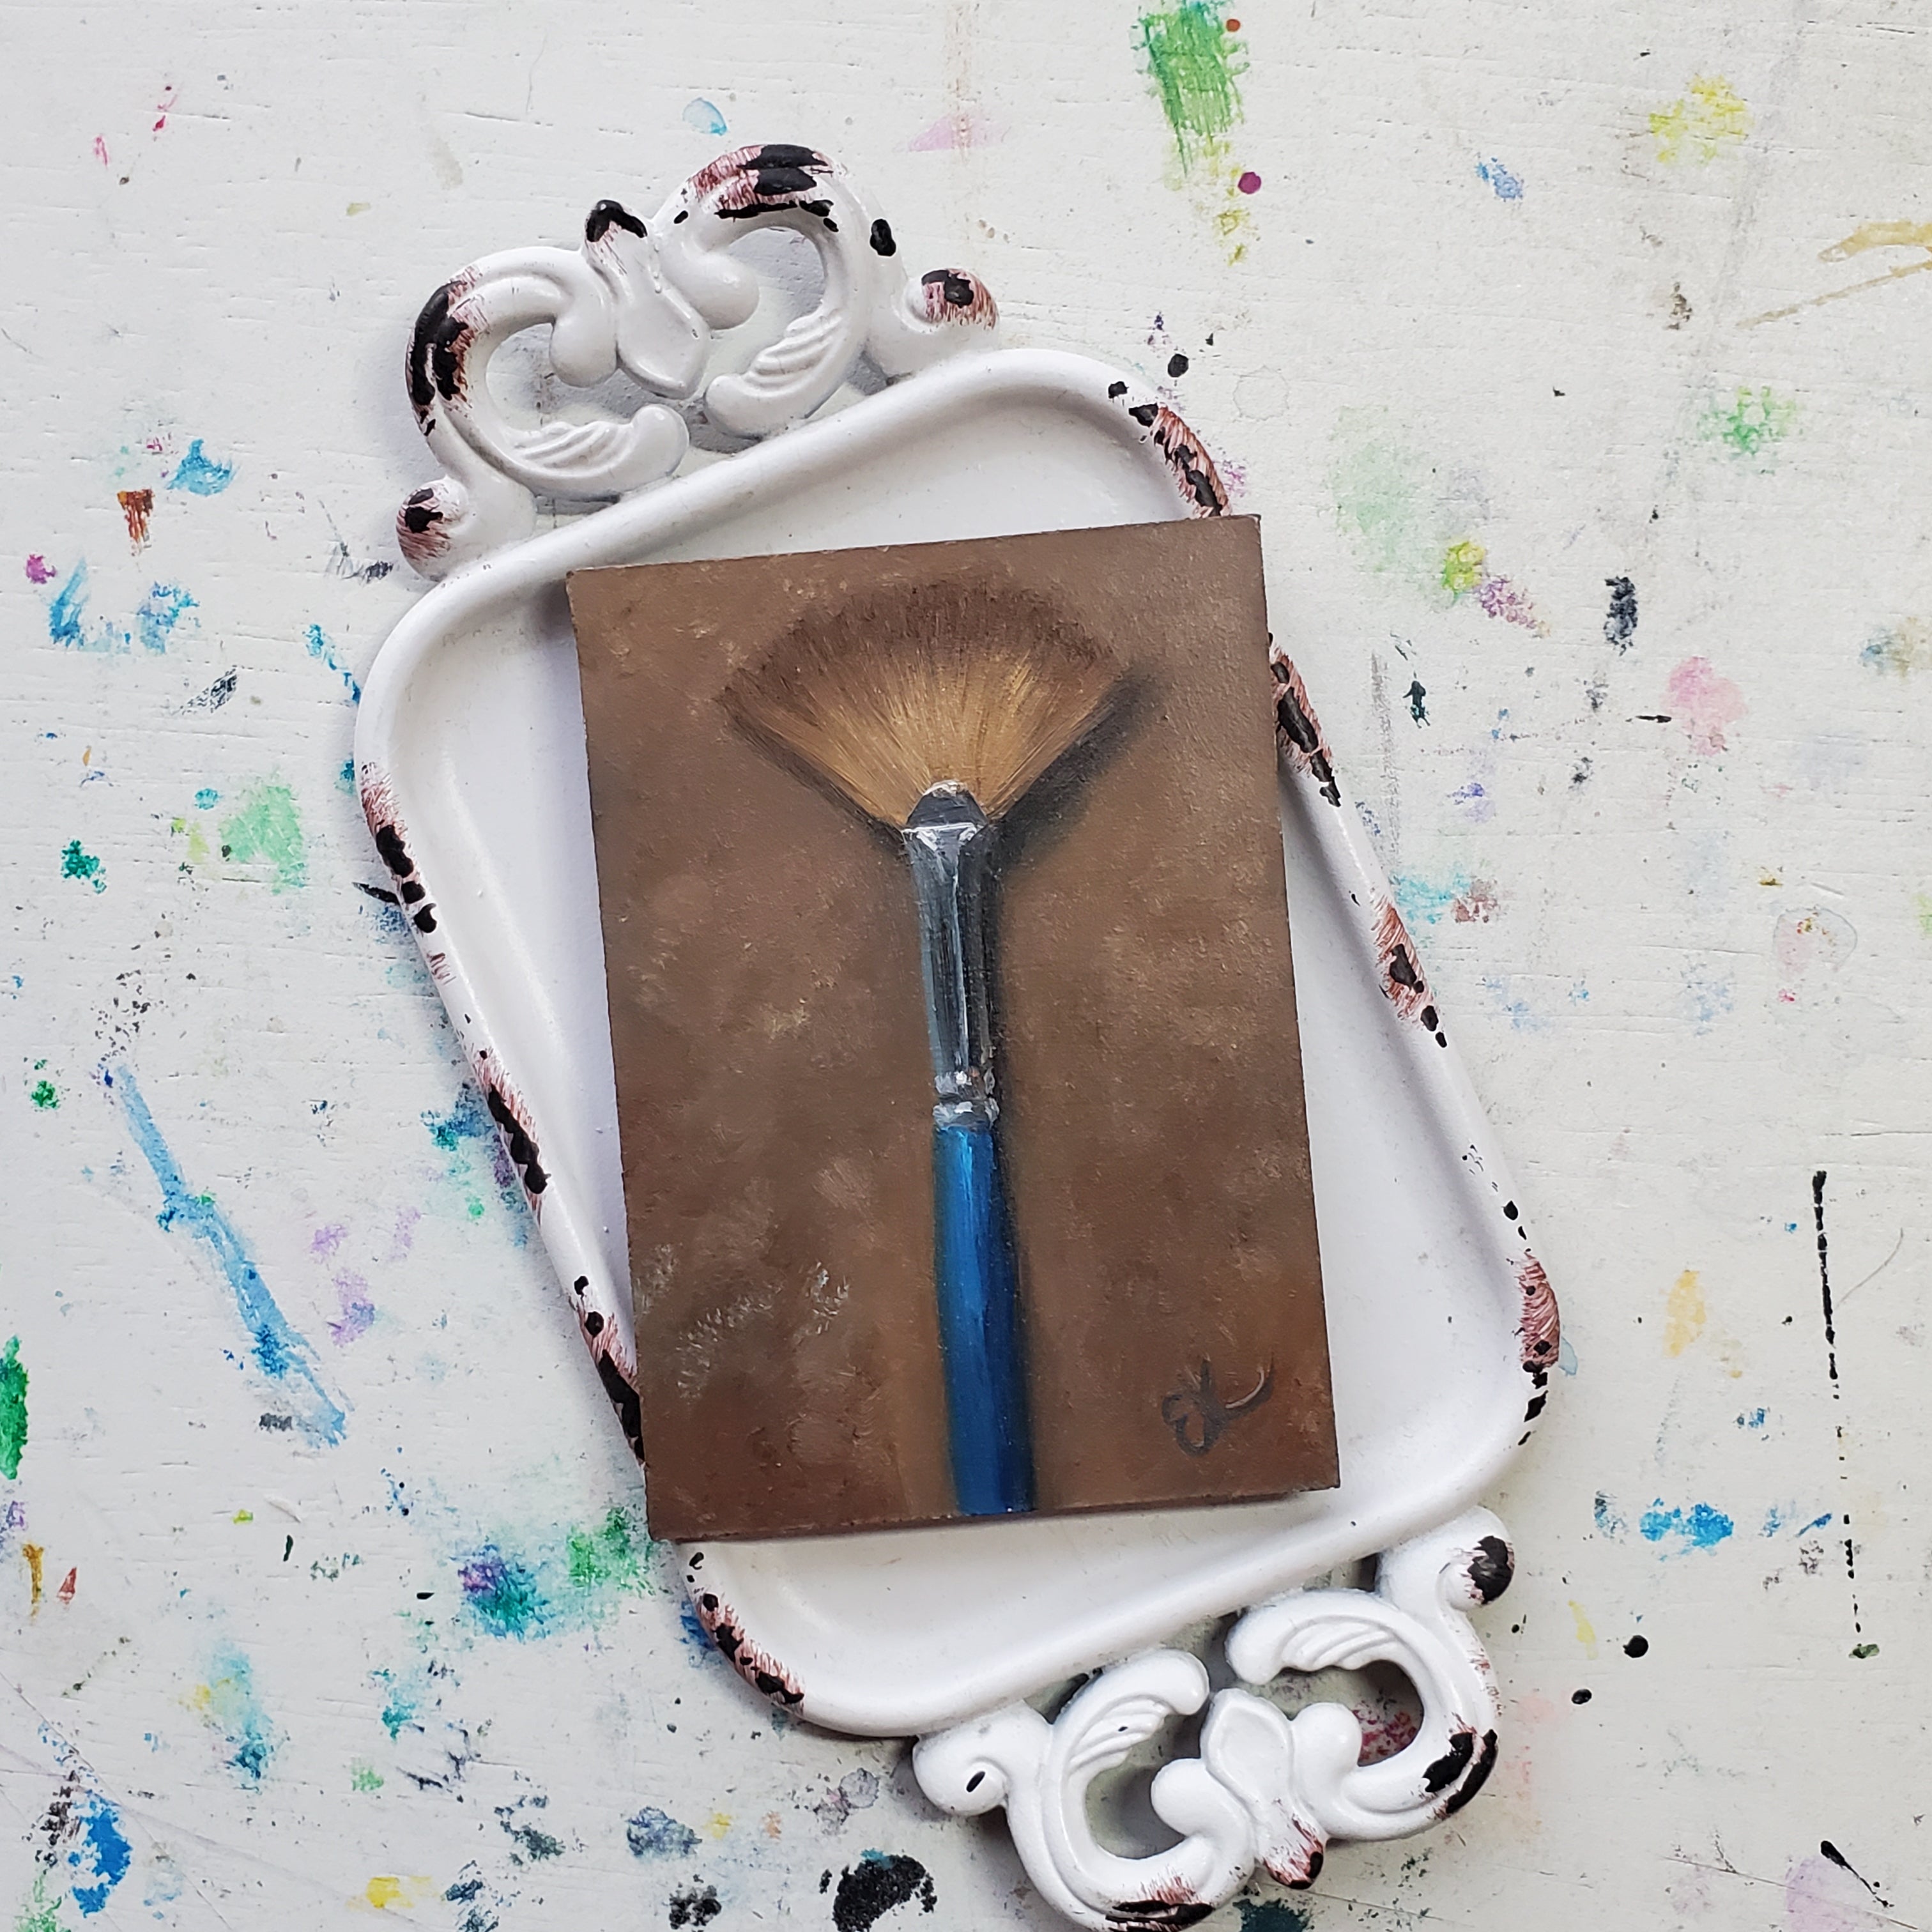 Brush Study || Mini Oil Painting on Panel || Display Easel Included